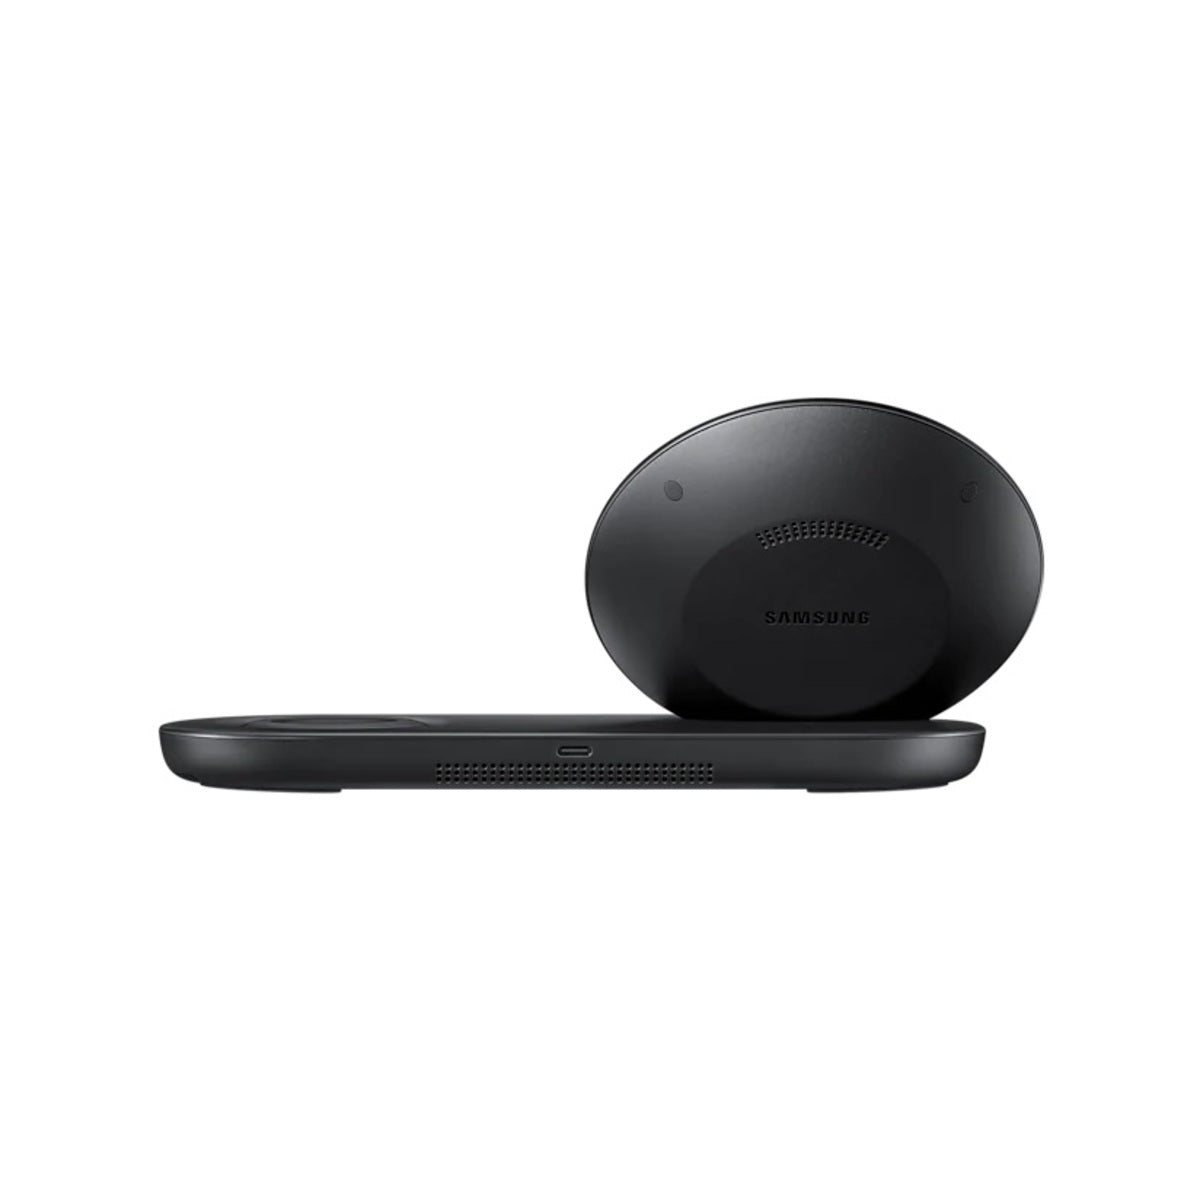 Samsung Dual Wireless Charger.